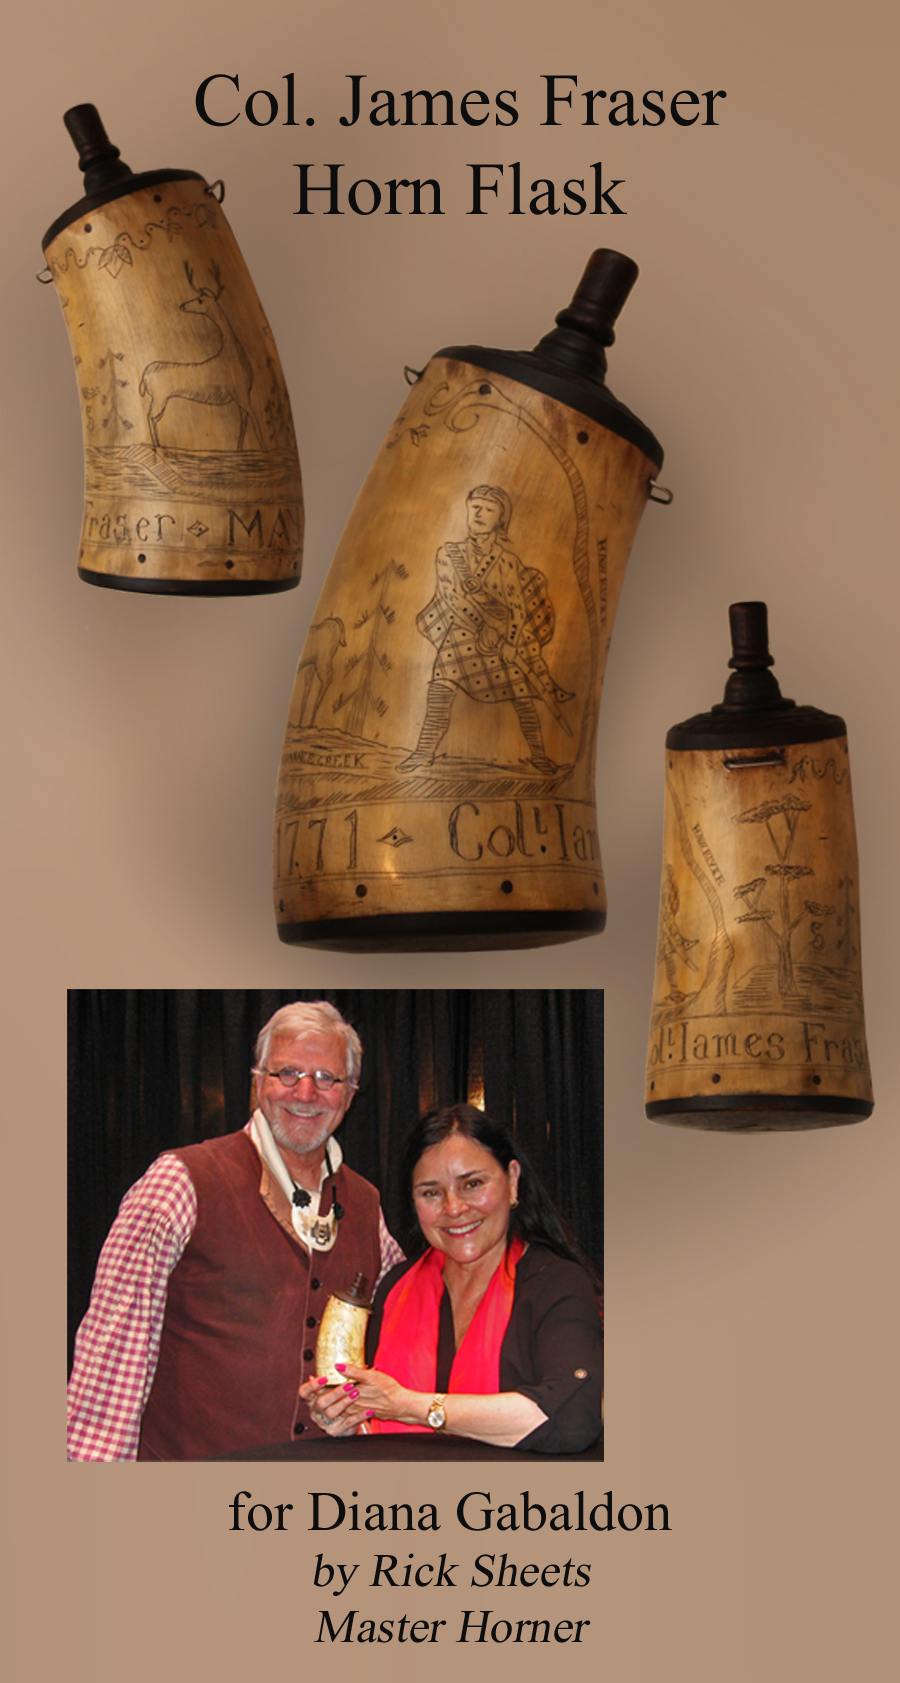 I worked with Alamance Battleground on making an official gift for Diana Gabaldon, author of the Outlander series, as thanks for her fundraising tour for our state historic sites. The theme of the horn flask is a Highlander (who suspiciously looks a bit like the actor who plays Jamie Fraser) and the Battle of Alamance. She said is was lovely and gave me feedback later how much she loved it